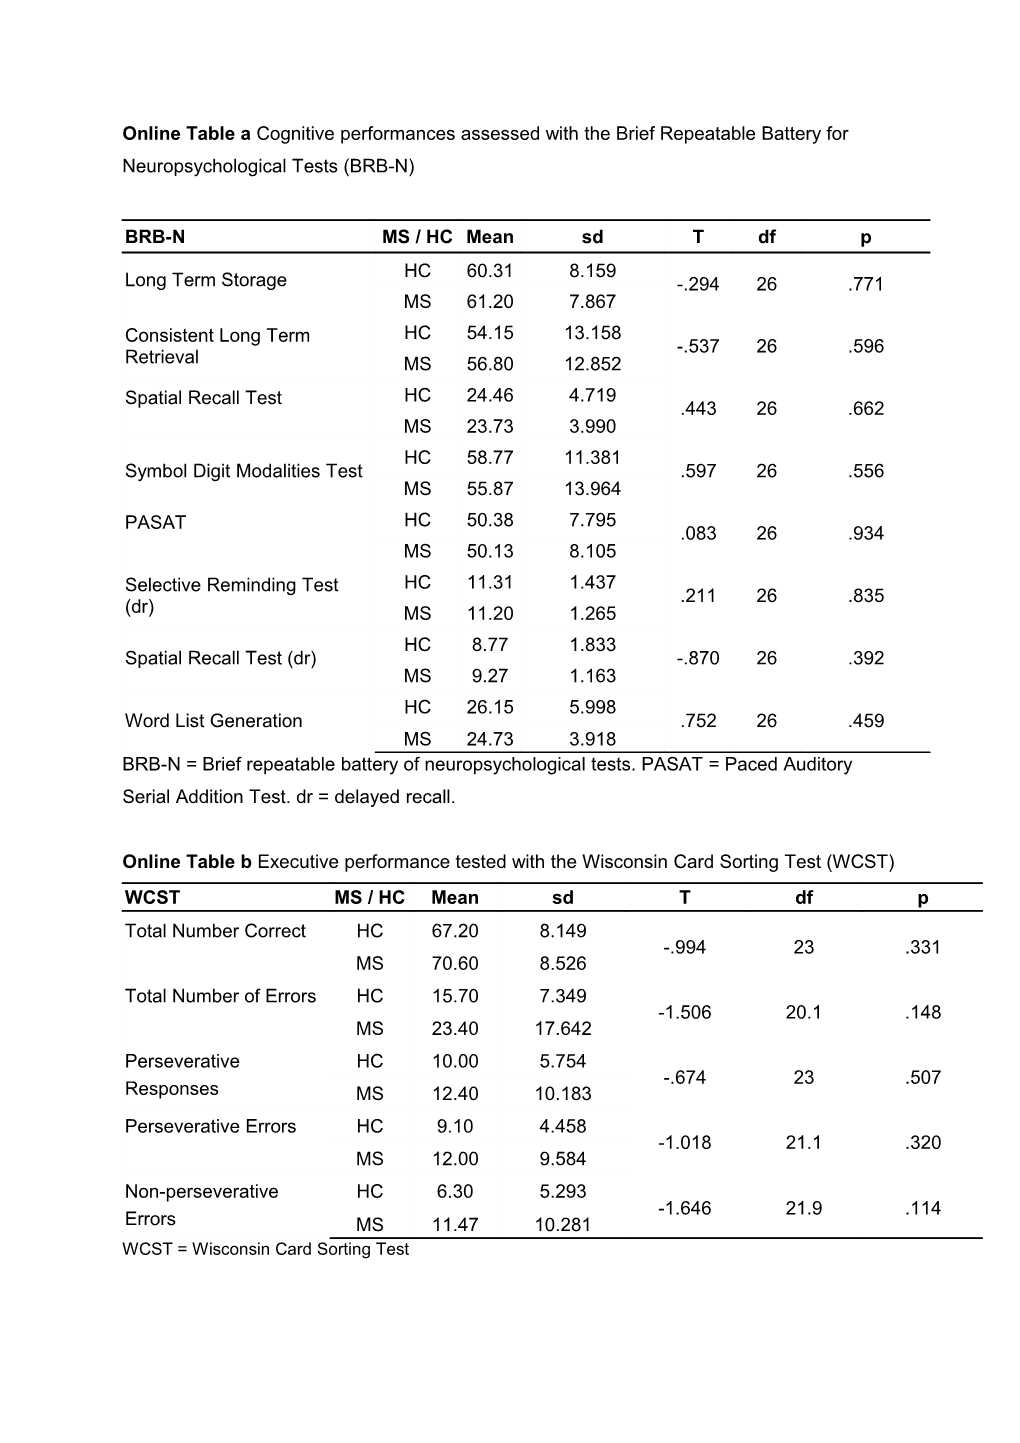 Table 1 Cognitive Performances Assessed with the Brief Repeatable Battery for Neuropsychological